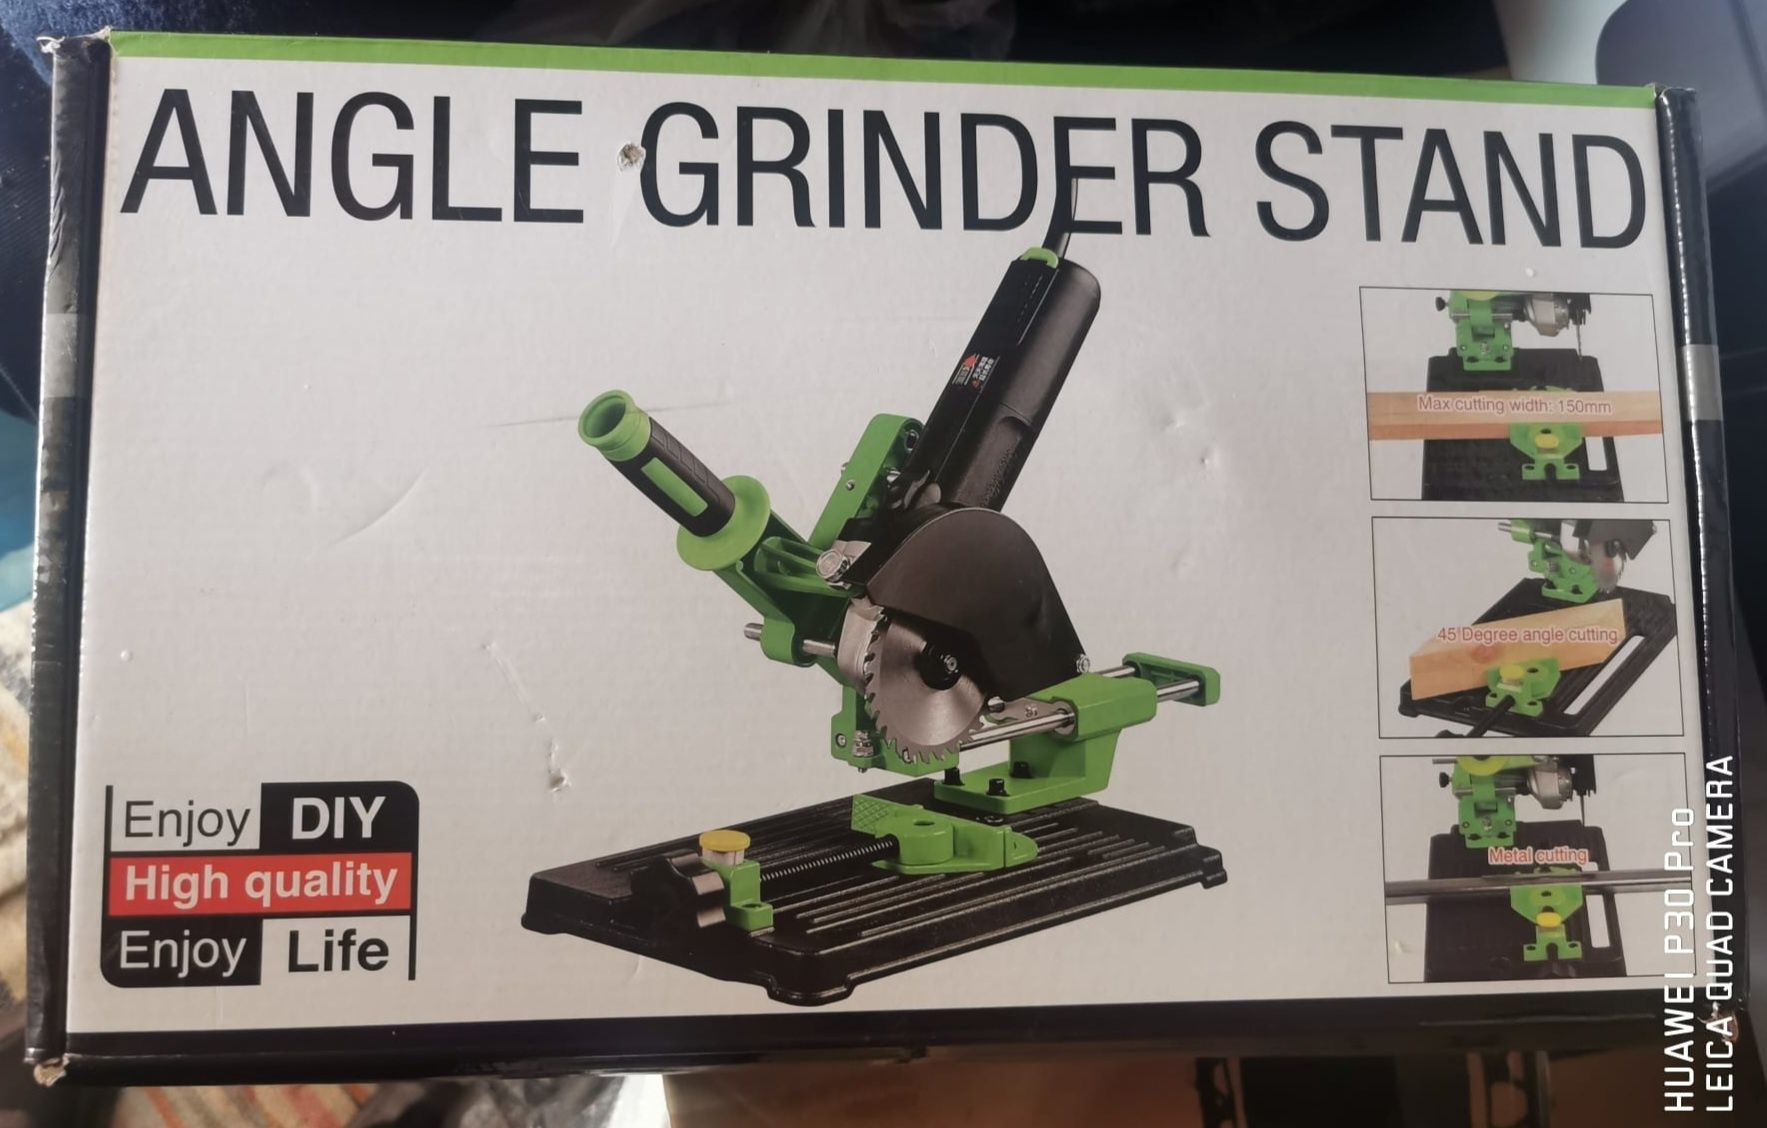 Angle grinder stand